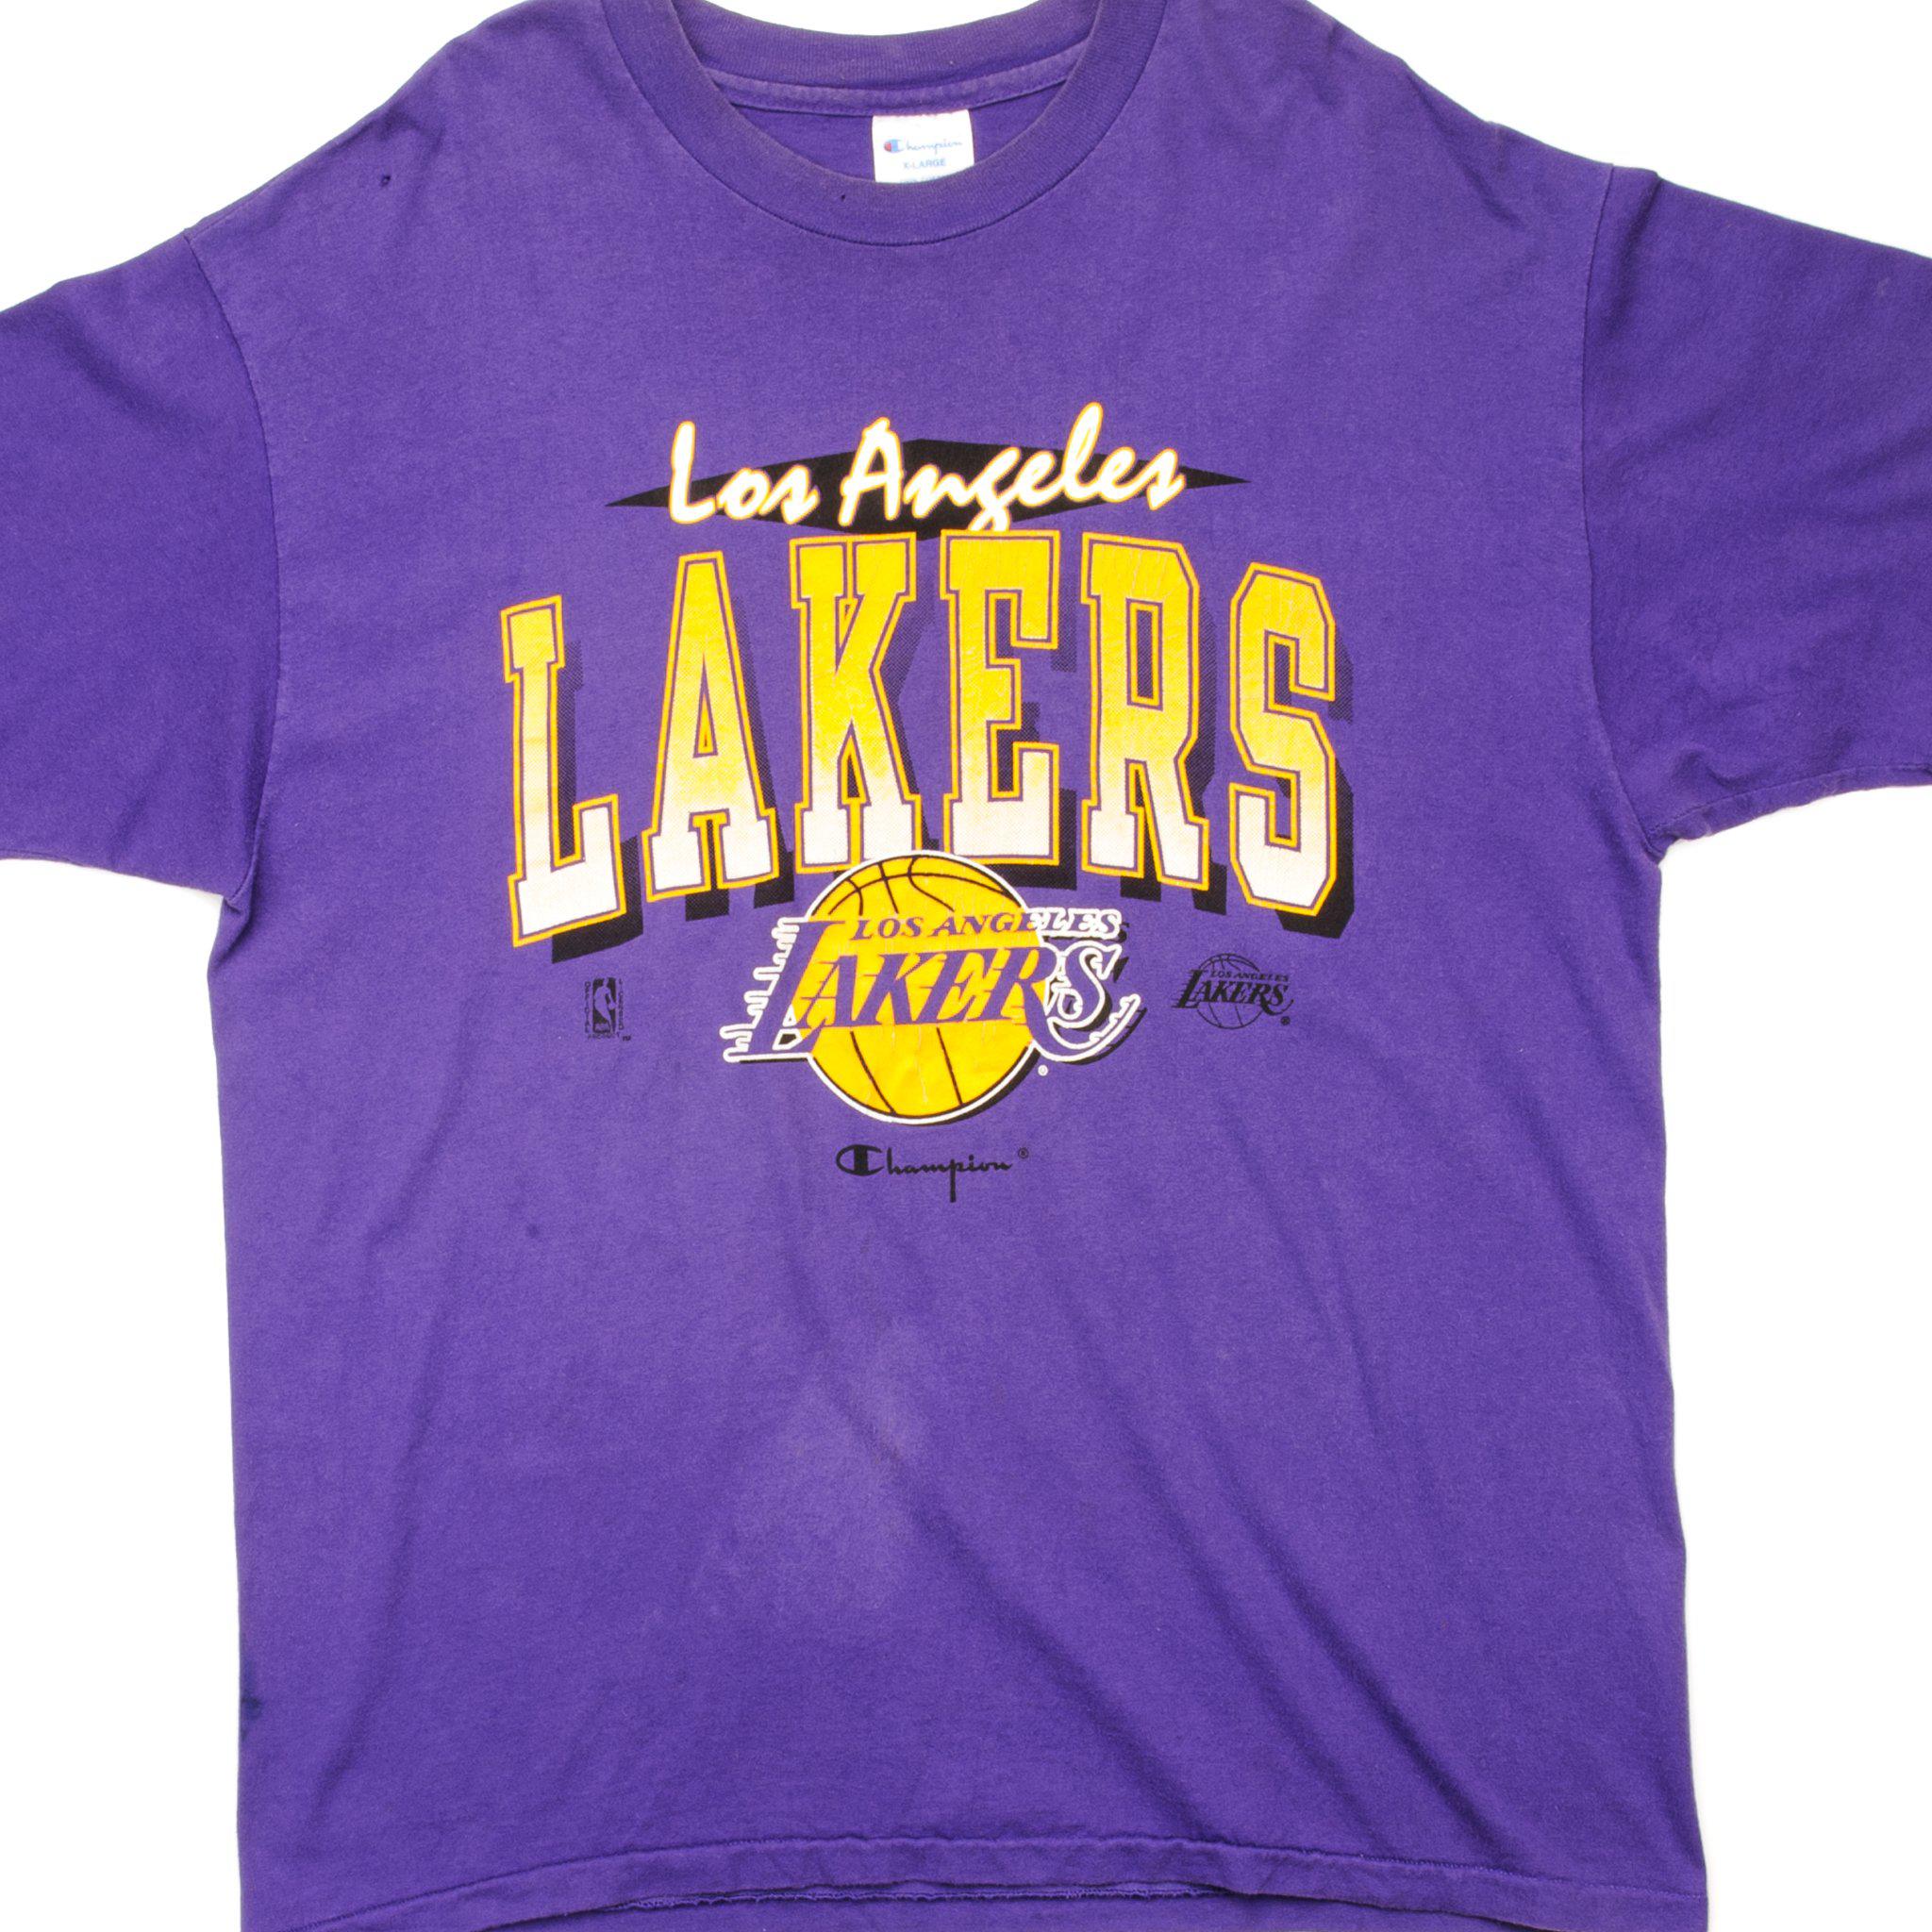 Outerwear - Los Angeles Lakers Throwback Apparel & Jerseys